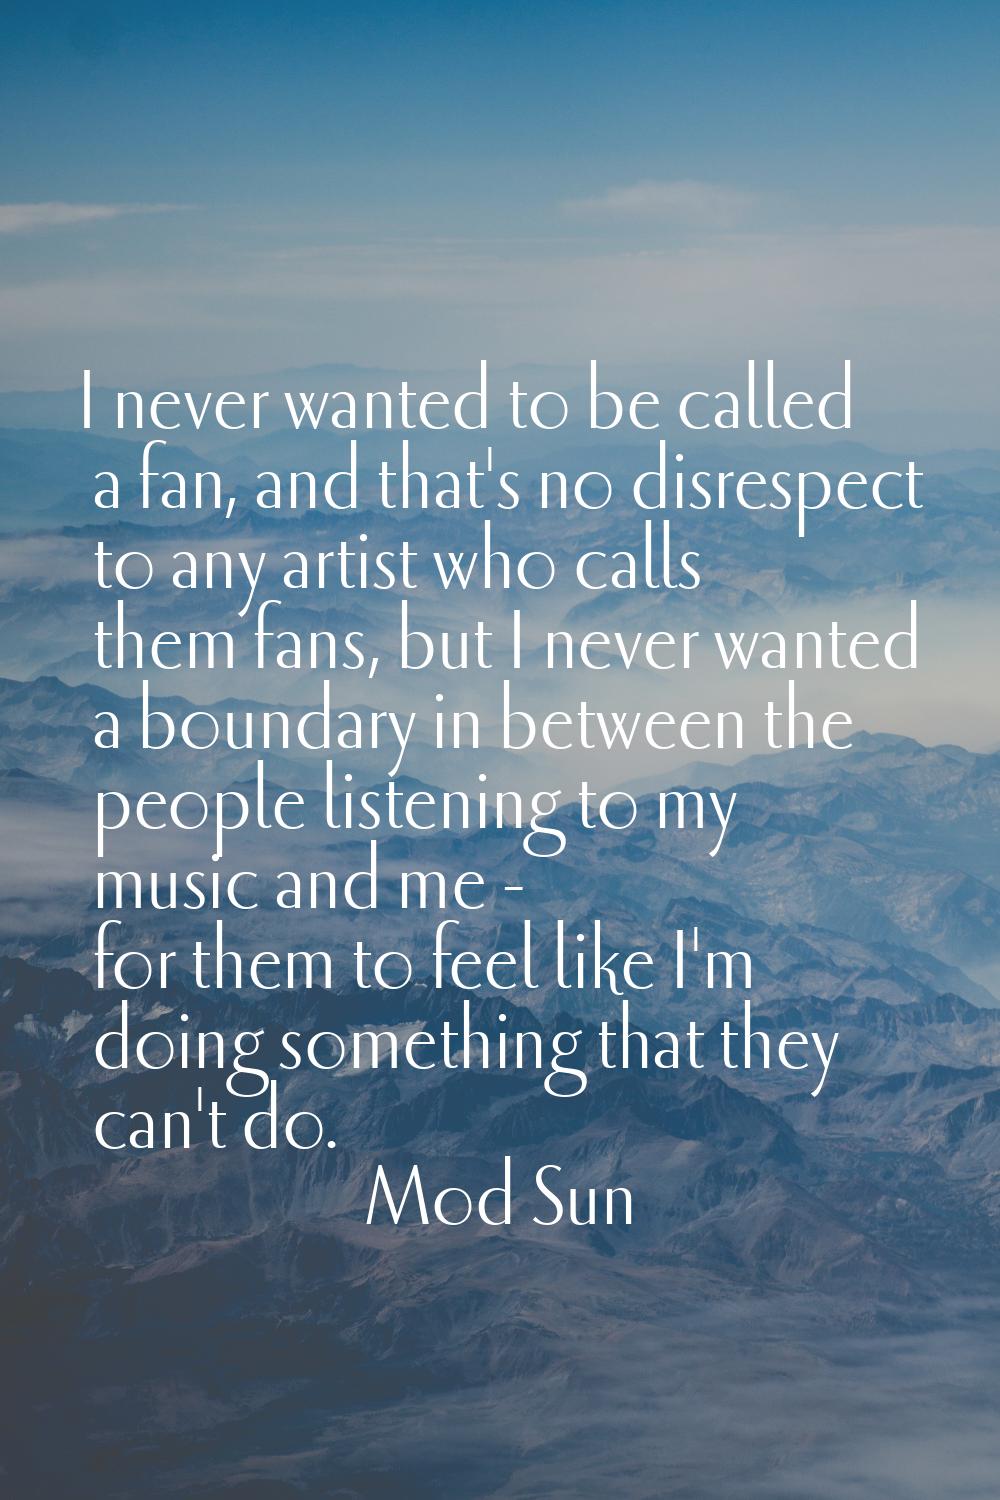 I never wanted to be called a fan, and that's no disrespect to any artist who calls them fans, but 